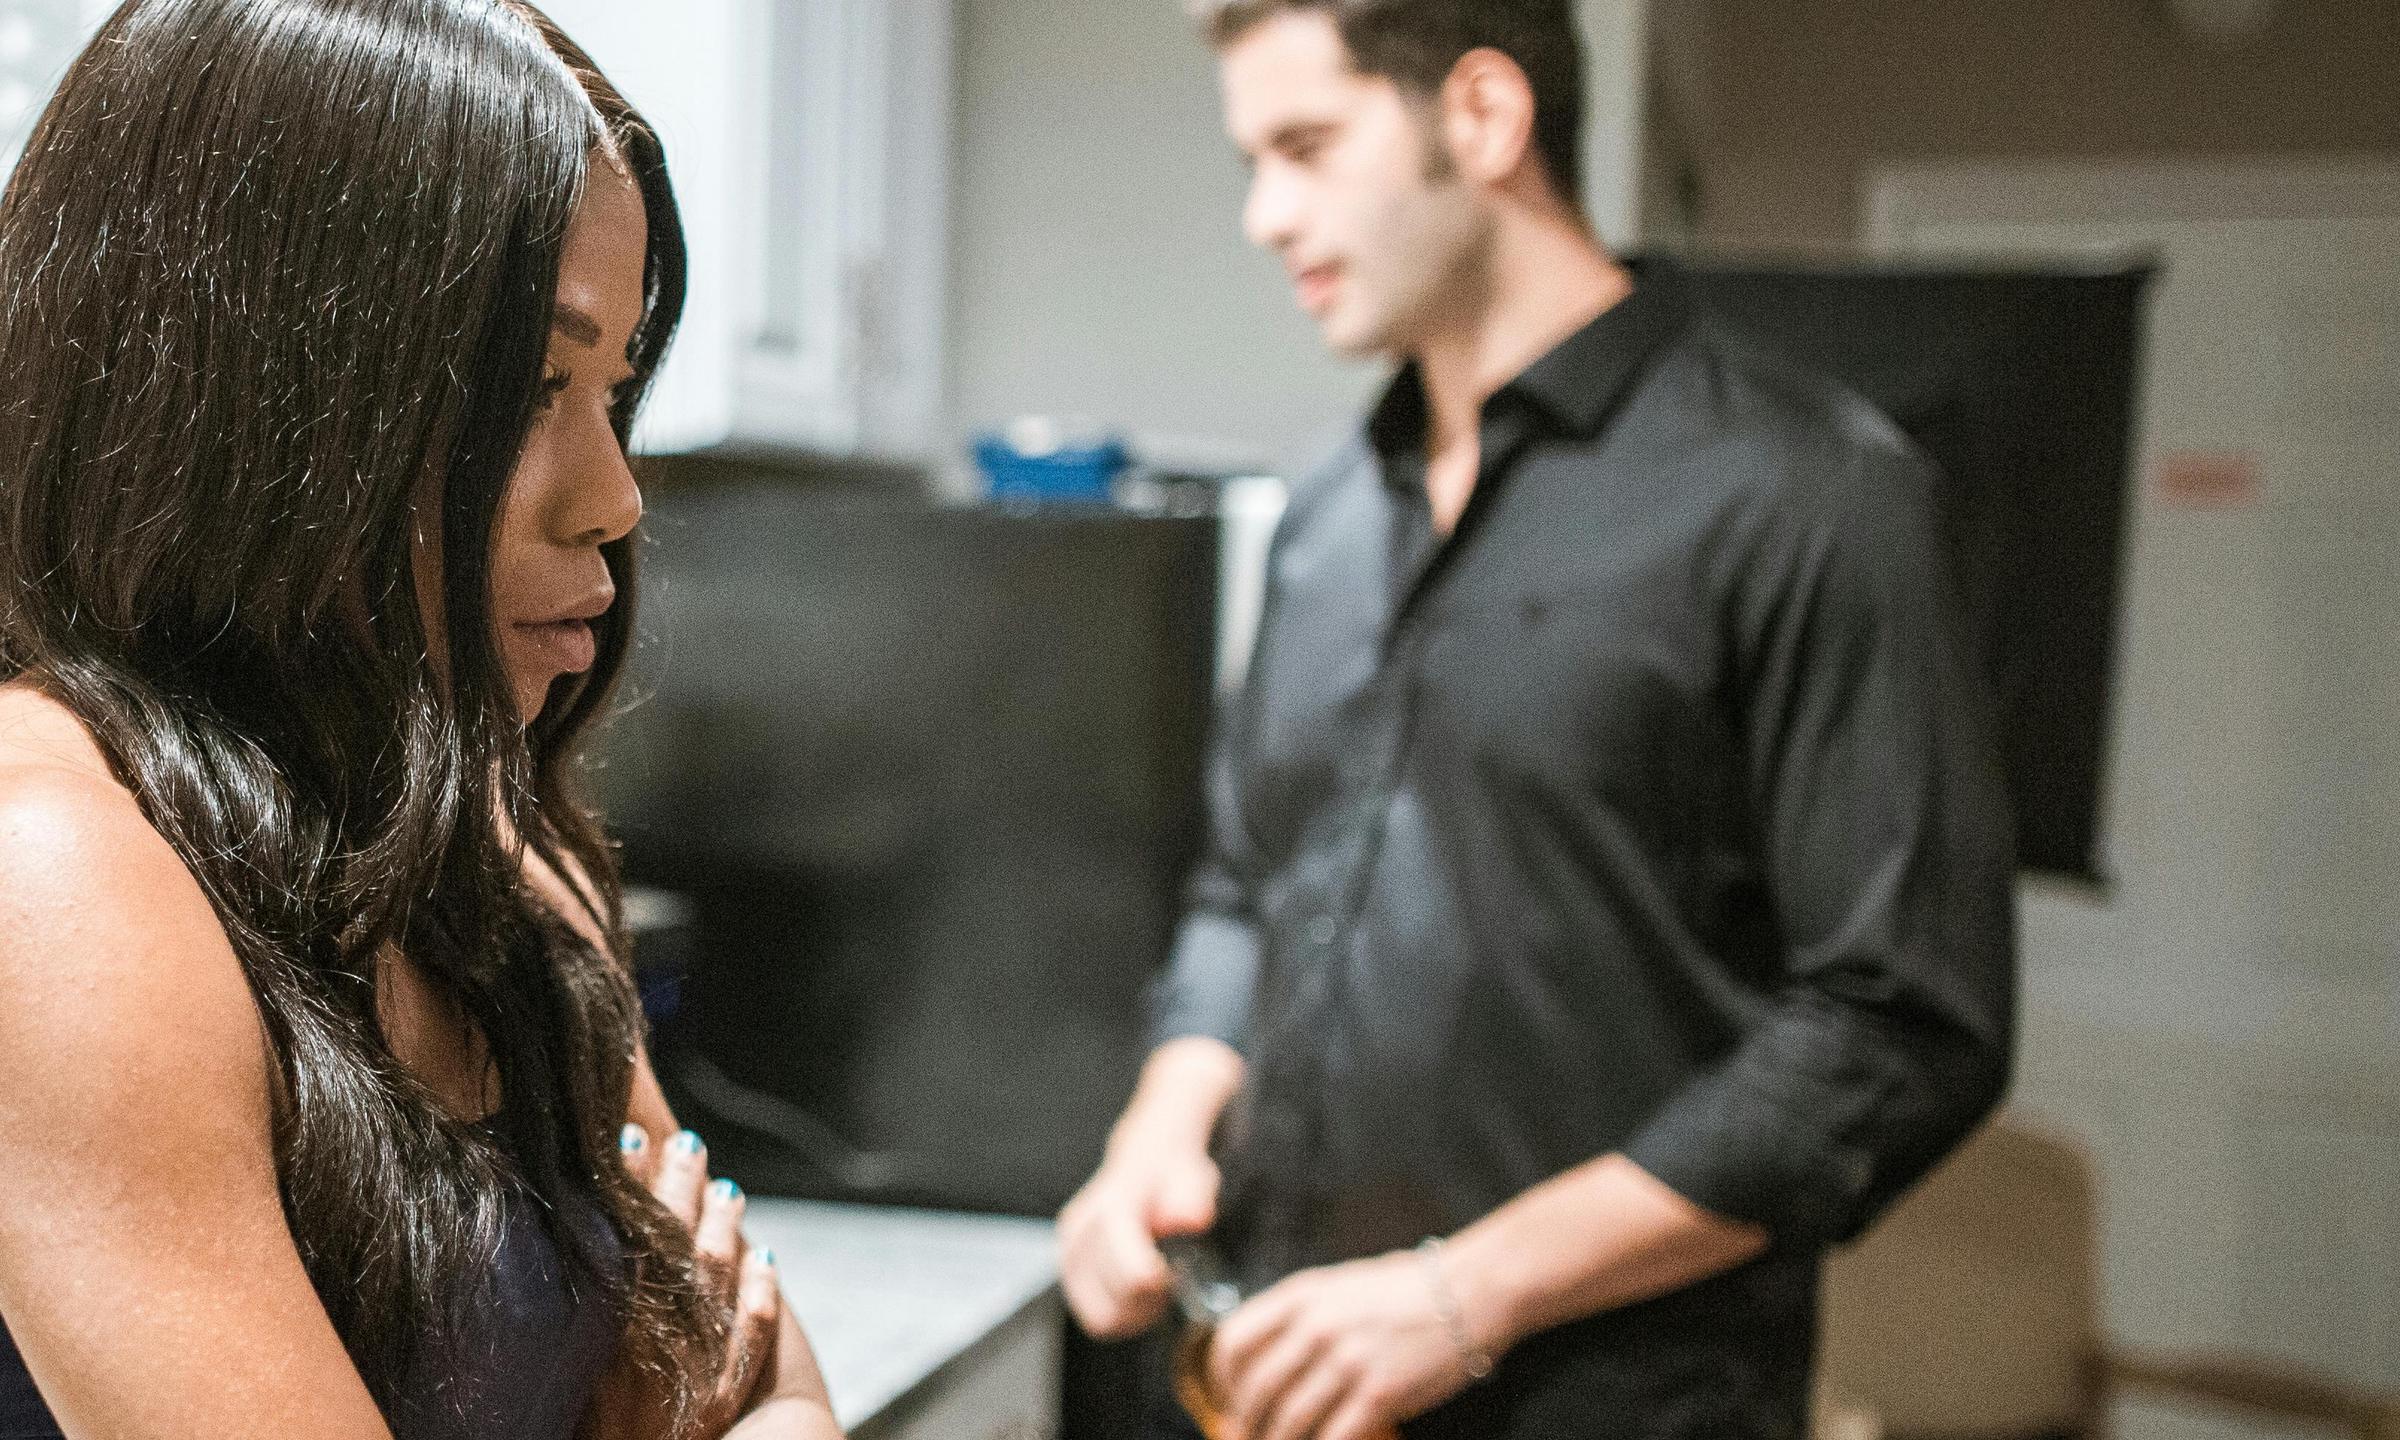 Emma confronts Mark in the kitchen, demanding answers | Source: Pexels